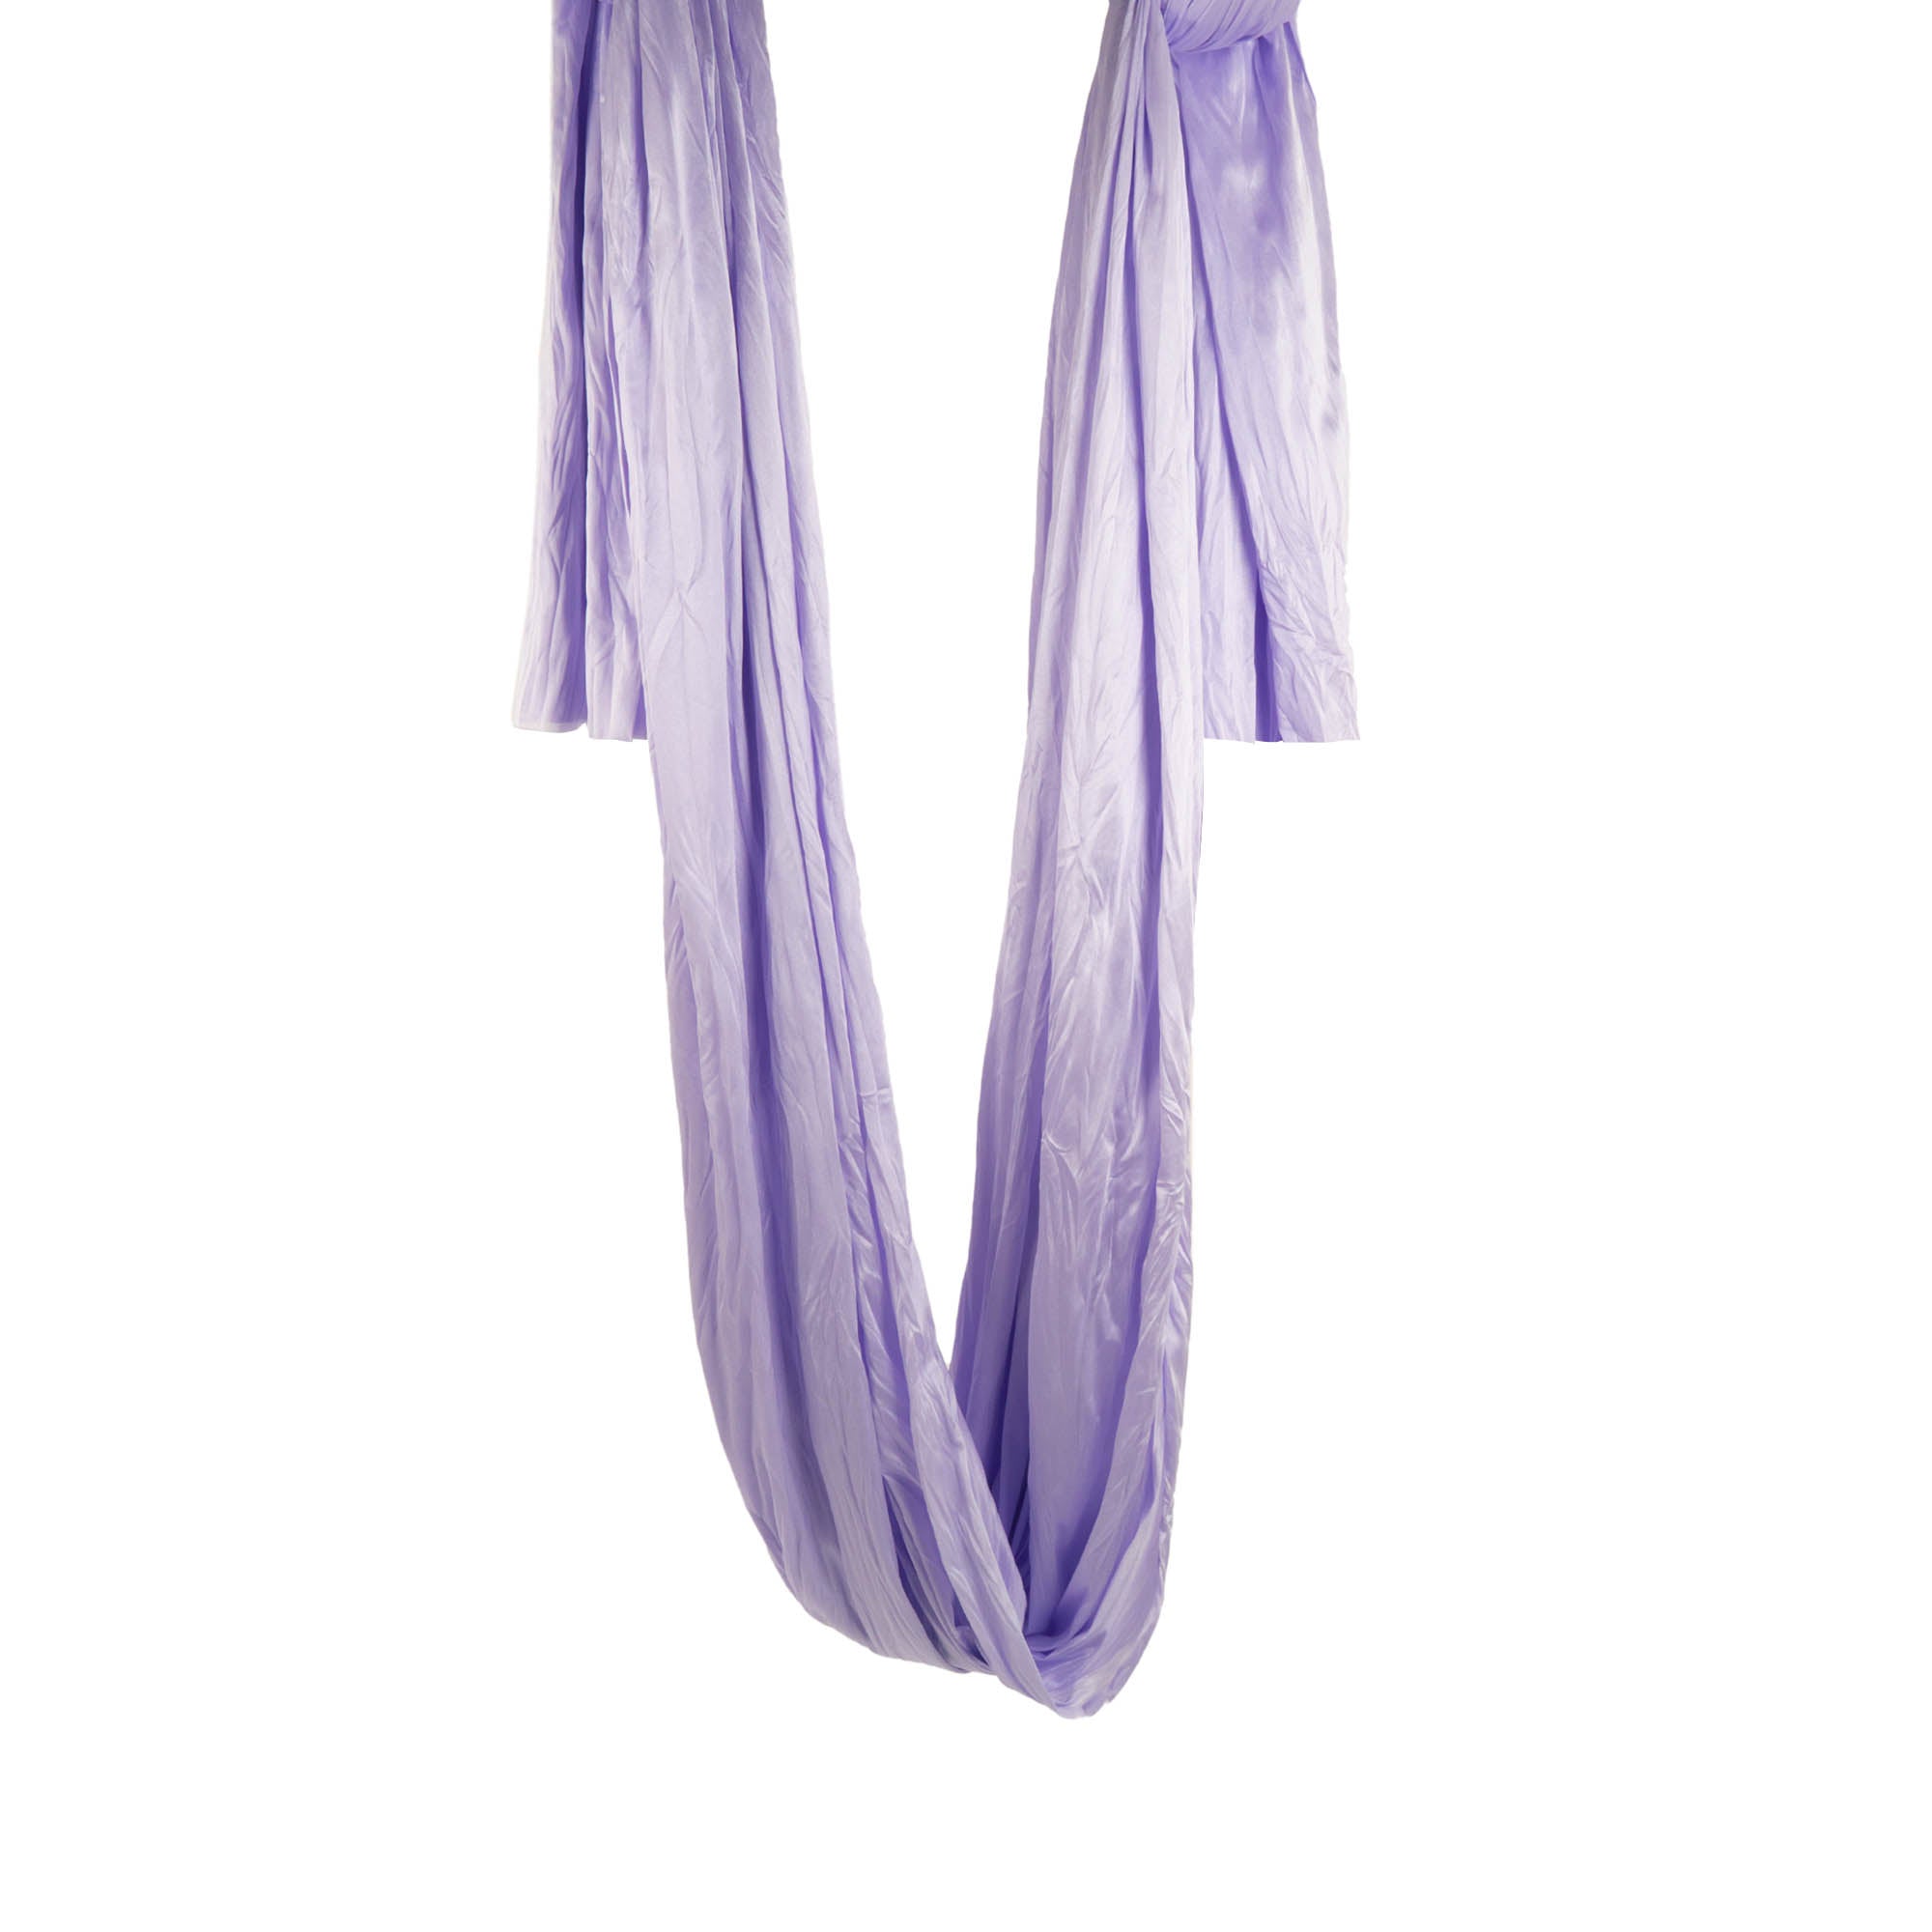 Prodigy 6m aerial yoga hammock in Lilac hanging